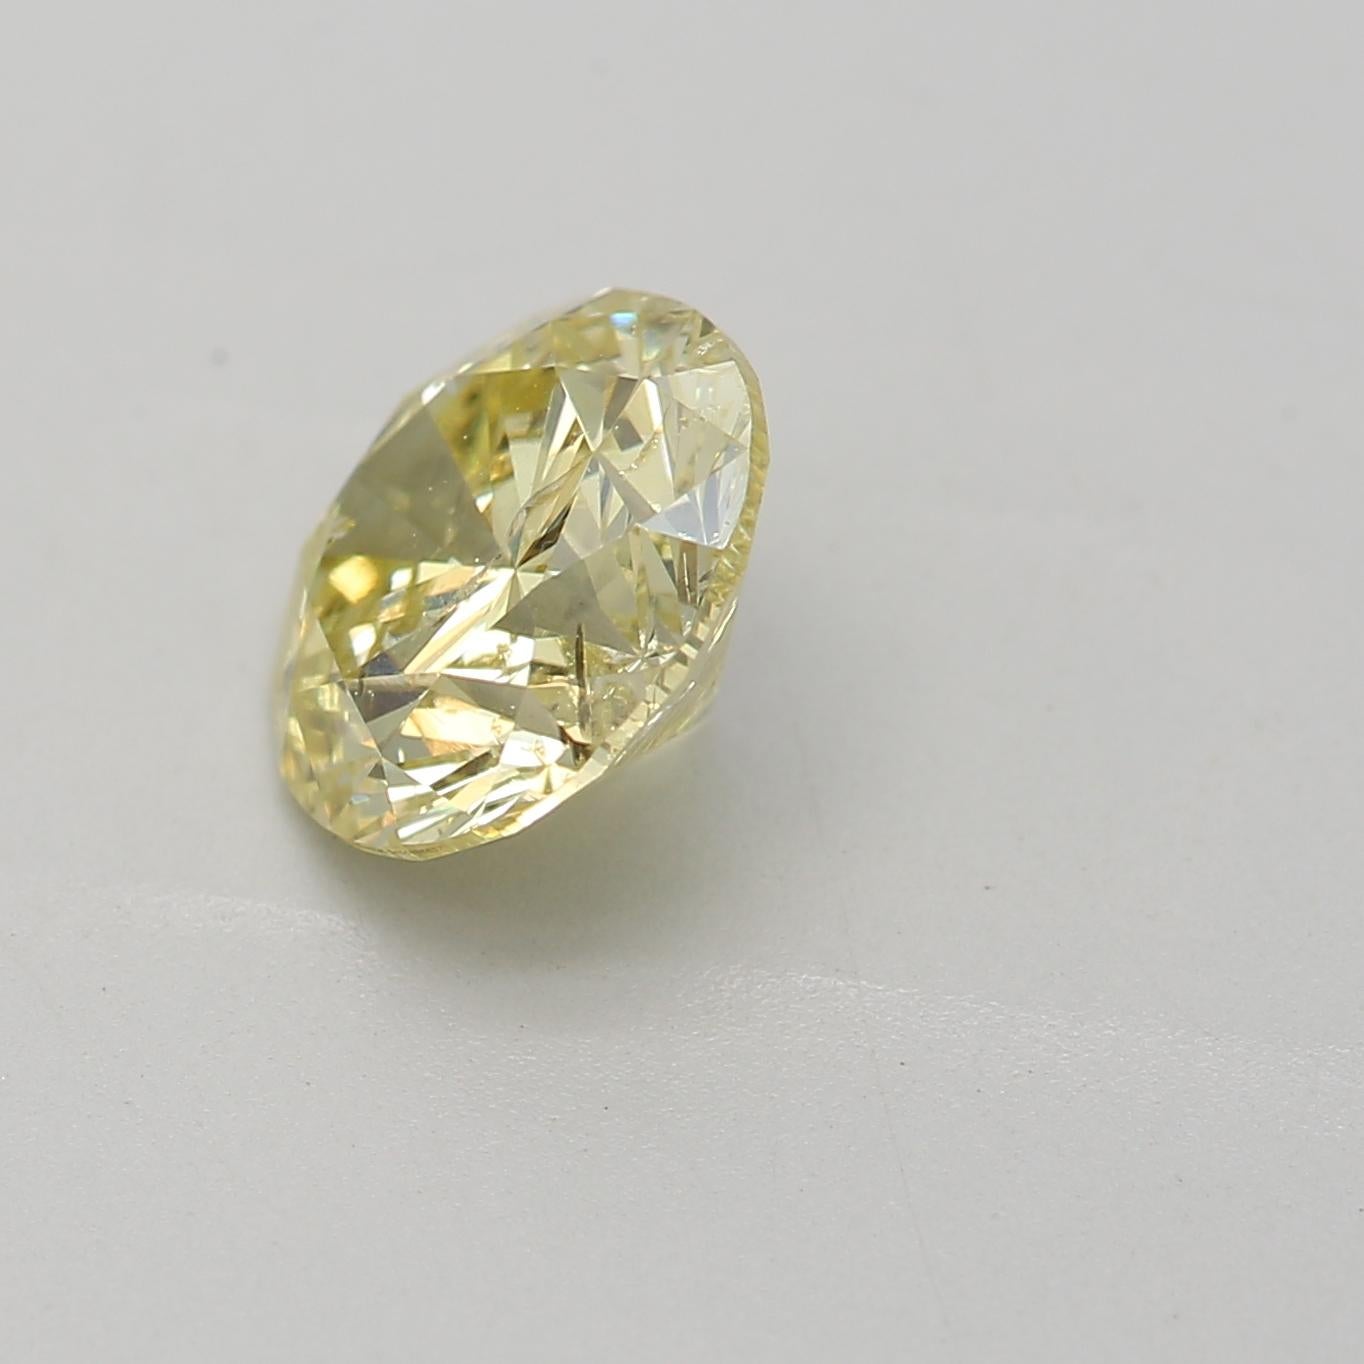 Round Cut 1.06 Carat Fancy Yellow Round cut diamond I3 Clarity GIA Certified For Sale